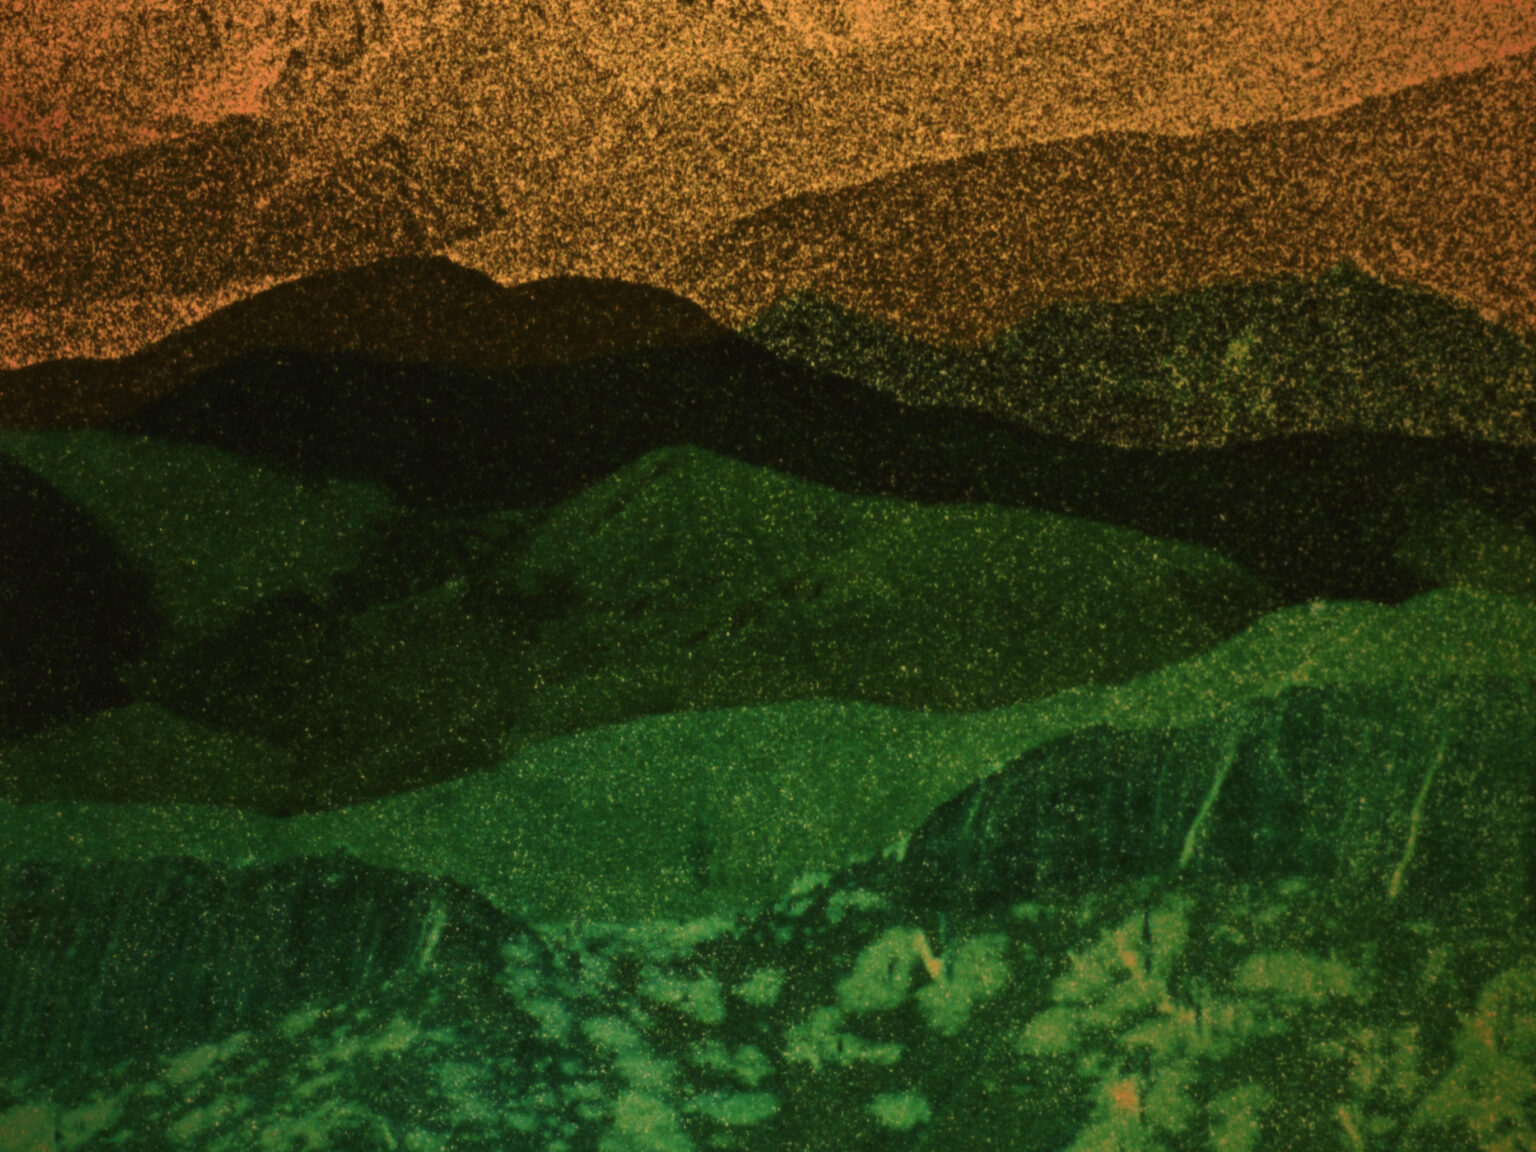 A landscape in shades of green, brown and orange. Layers of hills recede, becoming darker in colour until the orange sky is reached. The image is textured and grainy.